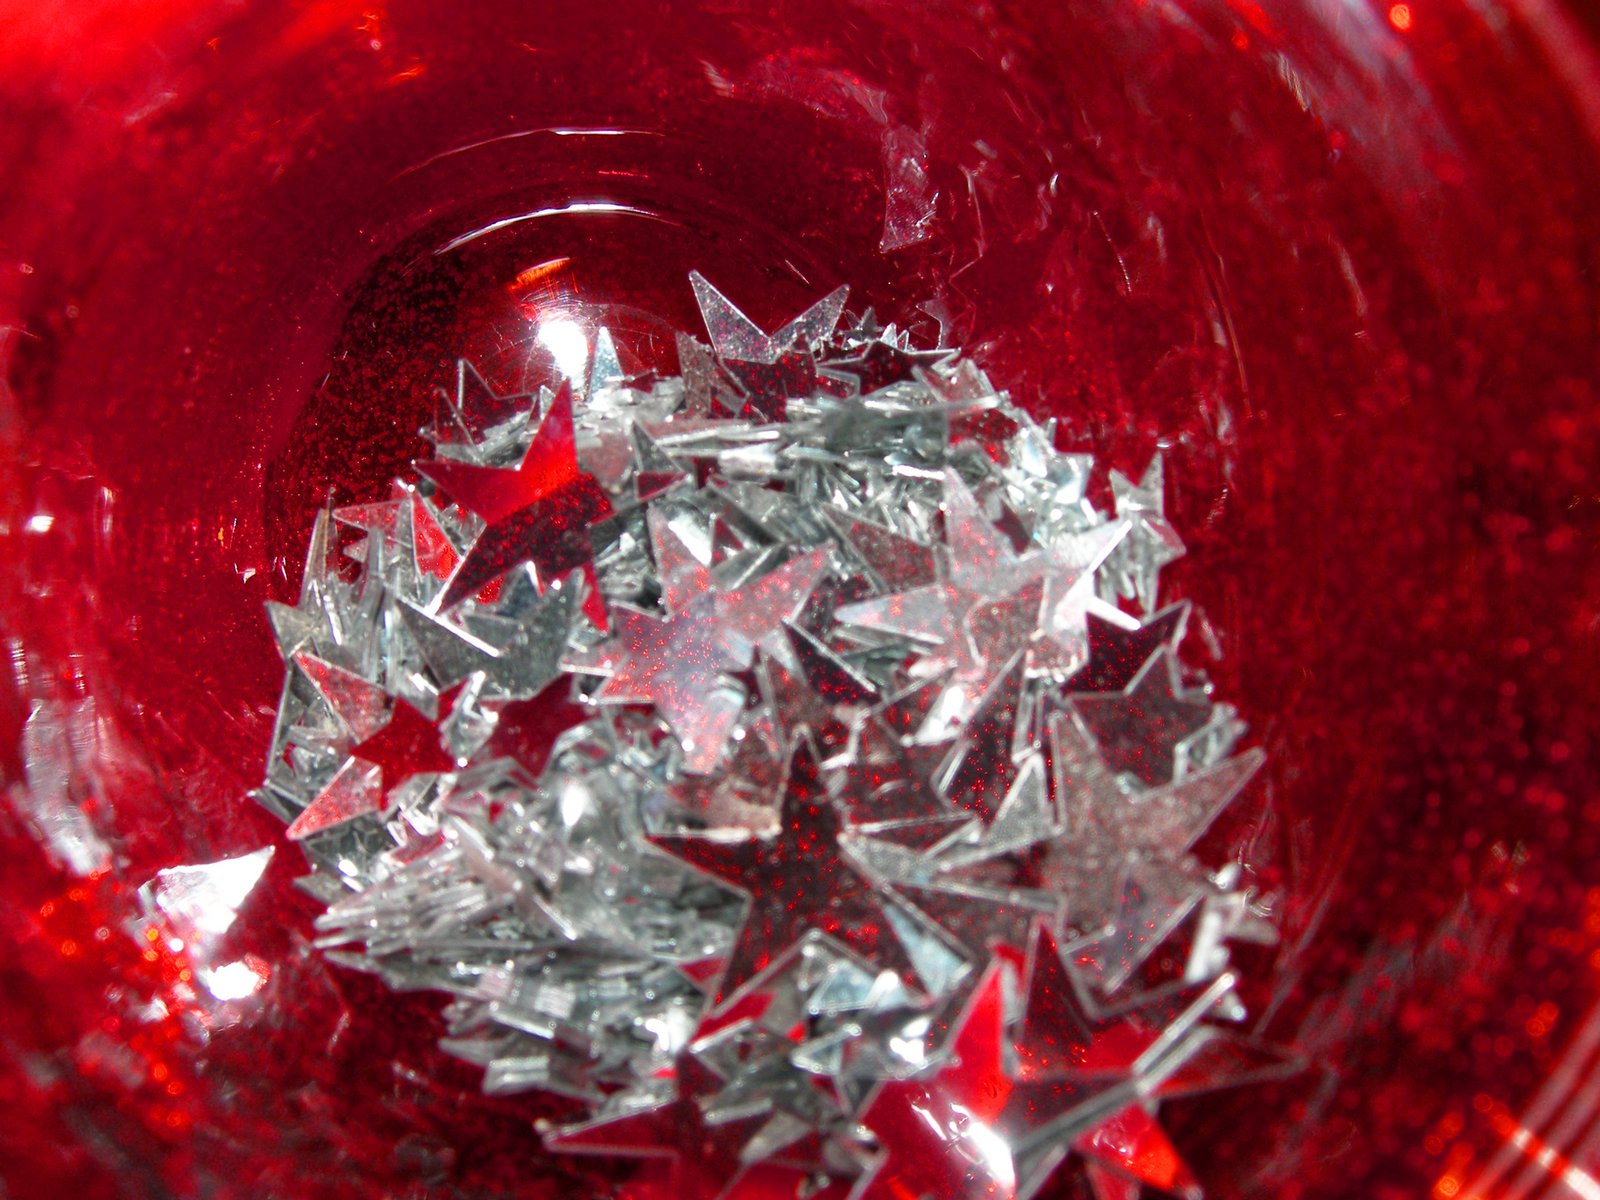 star shaped pieces of silver on top of a red bowl